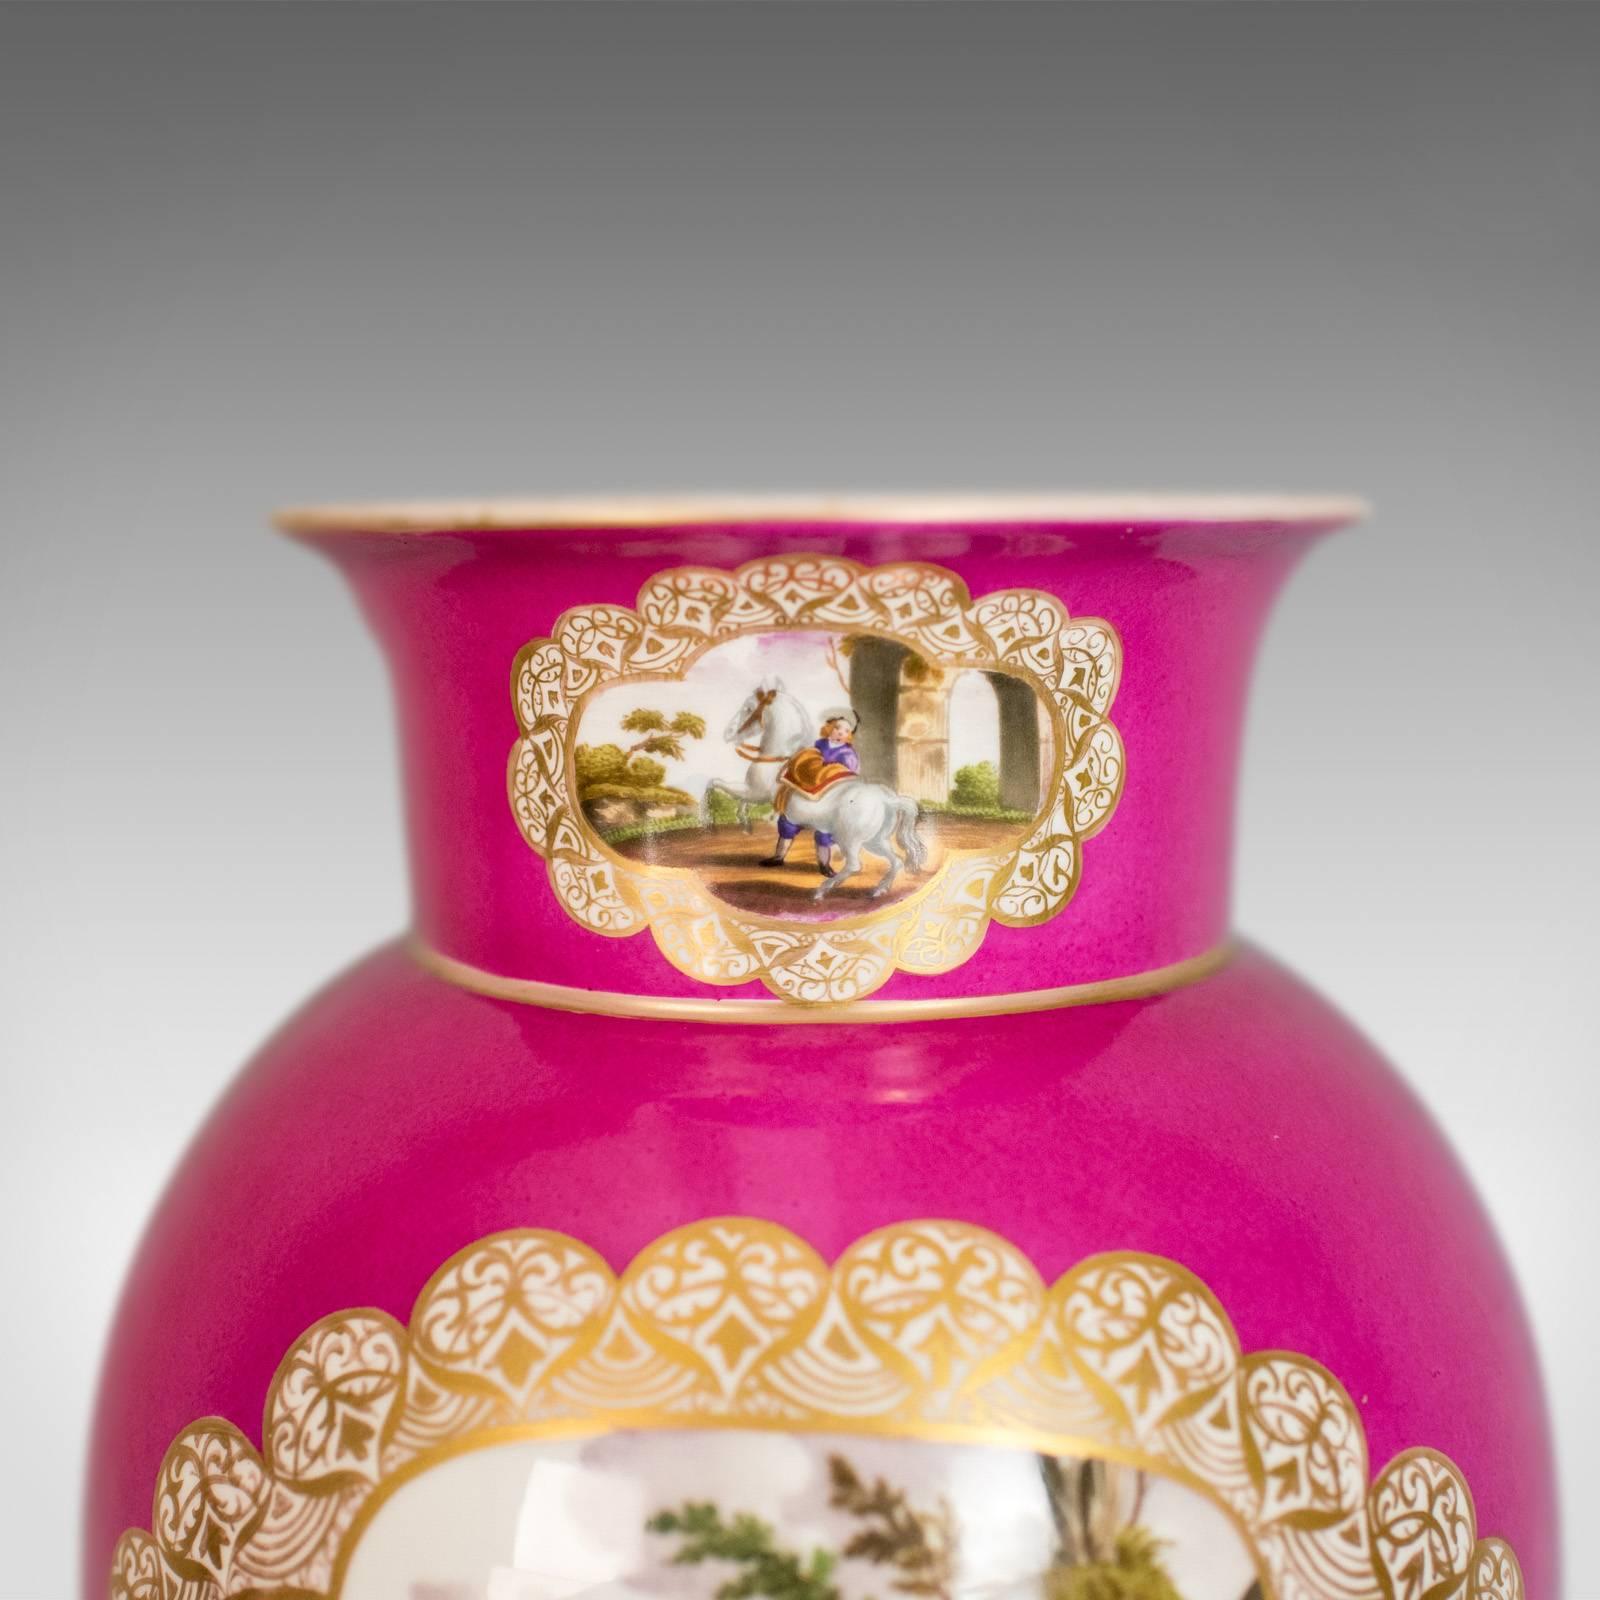 This is an antique vase, a German porcelain flower vase monogrammed 'AR' beneath and dating to the late 19th century.

A large piece in very good order throughout
Painted scenes on a vivid cerise ground
Highlighted with golden trace to the neck